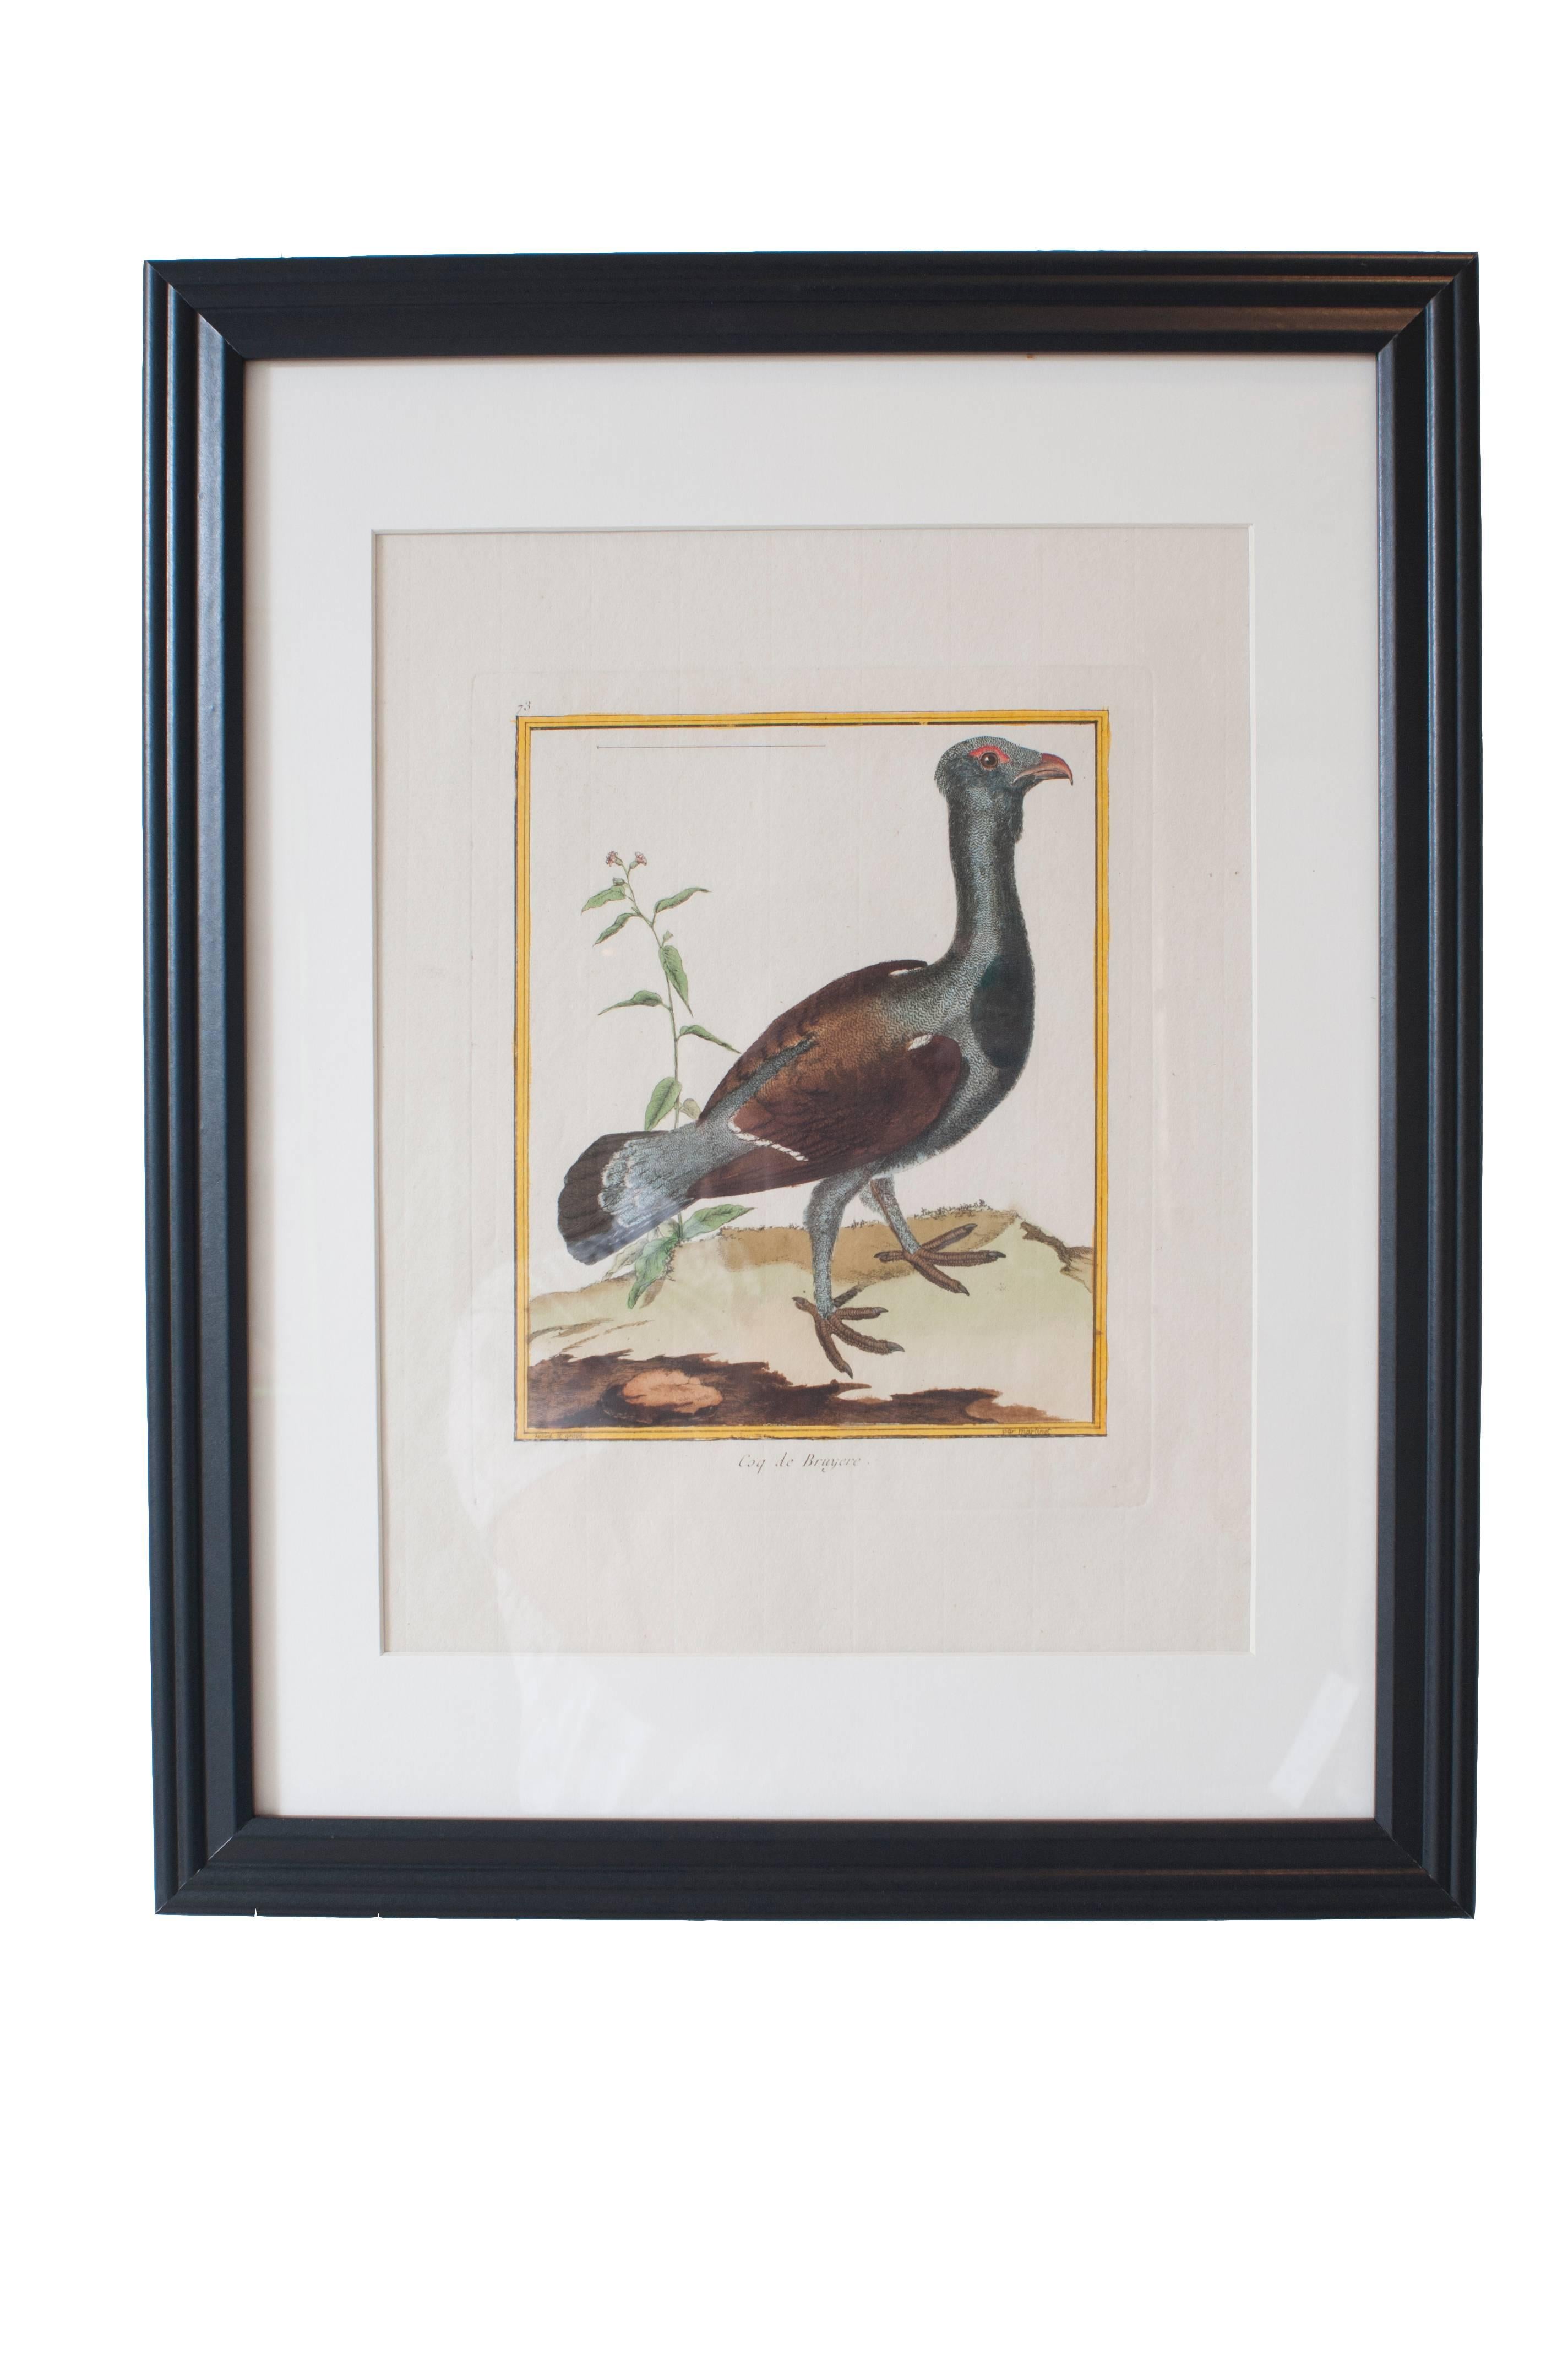 Six Hand Colored Engravings of Birds in New Frames & Matting. By Martinet. For Sale 1